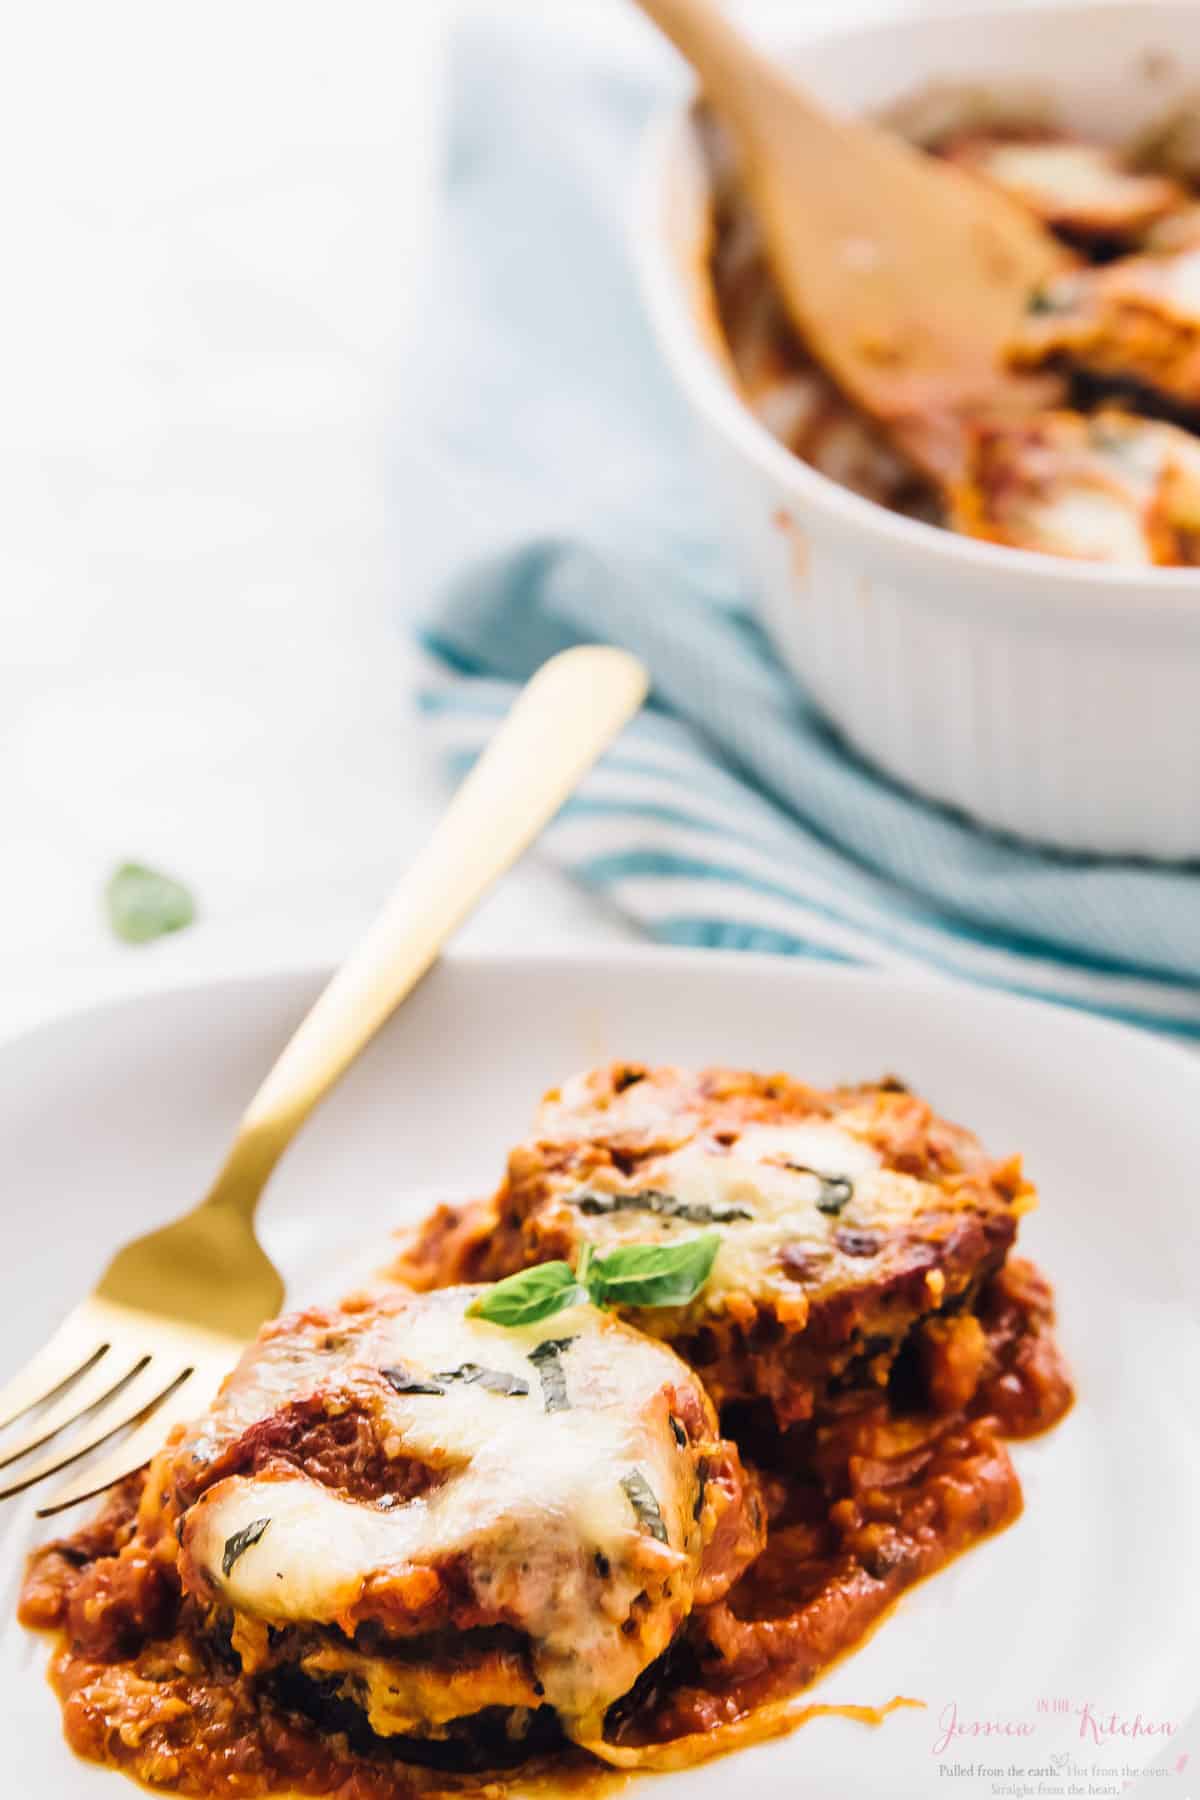 Baked eggplant parmesan on plate with gold fork